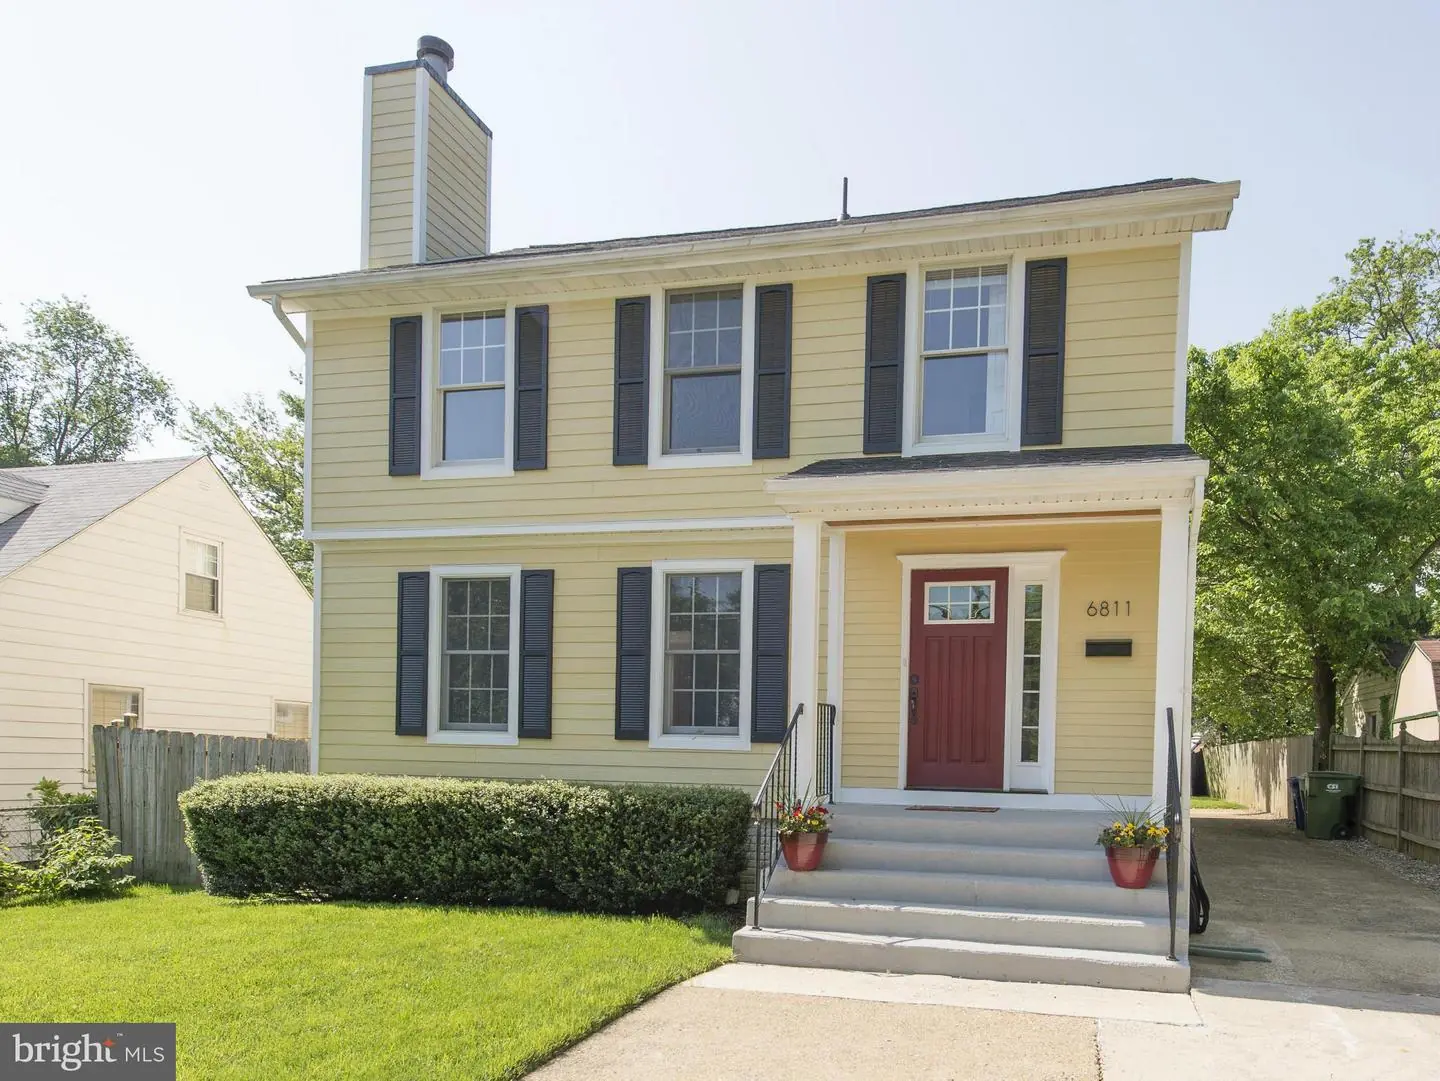 1003027234-300811054523-2021-09-07-12-56-08  |   | Falls Church Delaware Real Estate For Sale | MLS# 1003027234  - Best of Northern Virginia